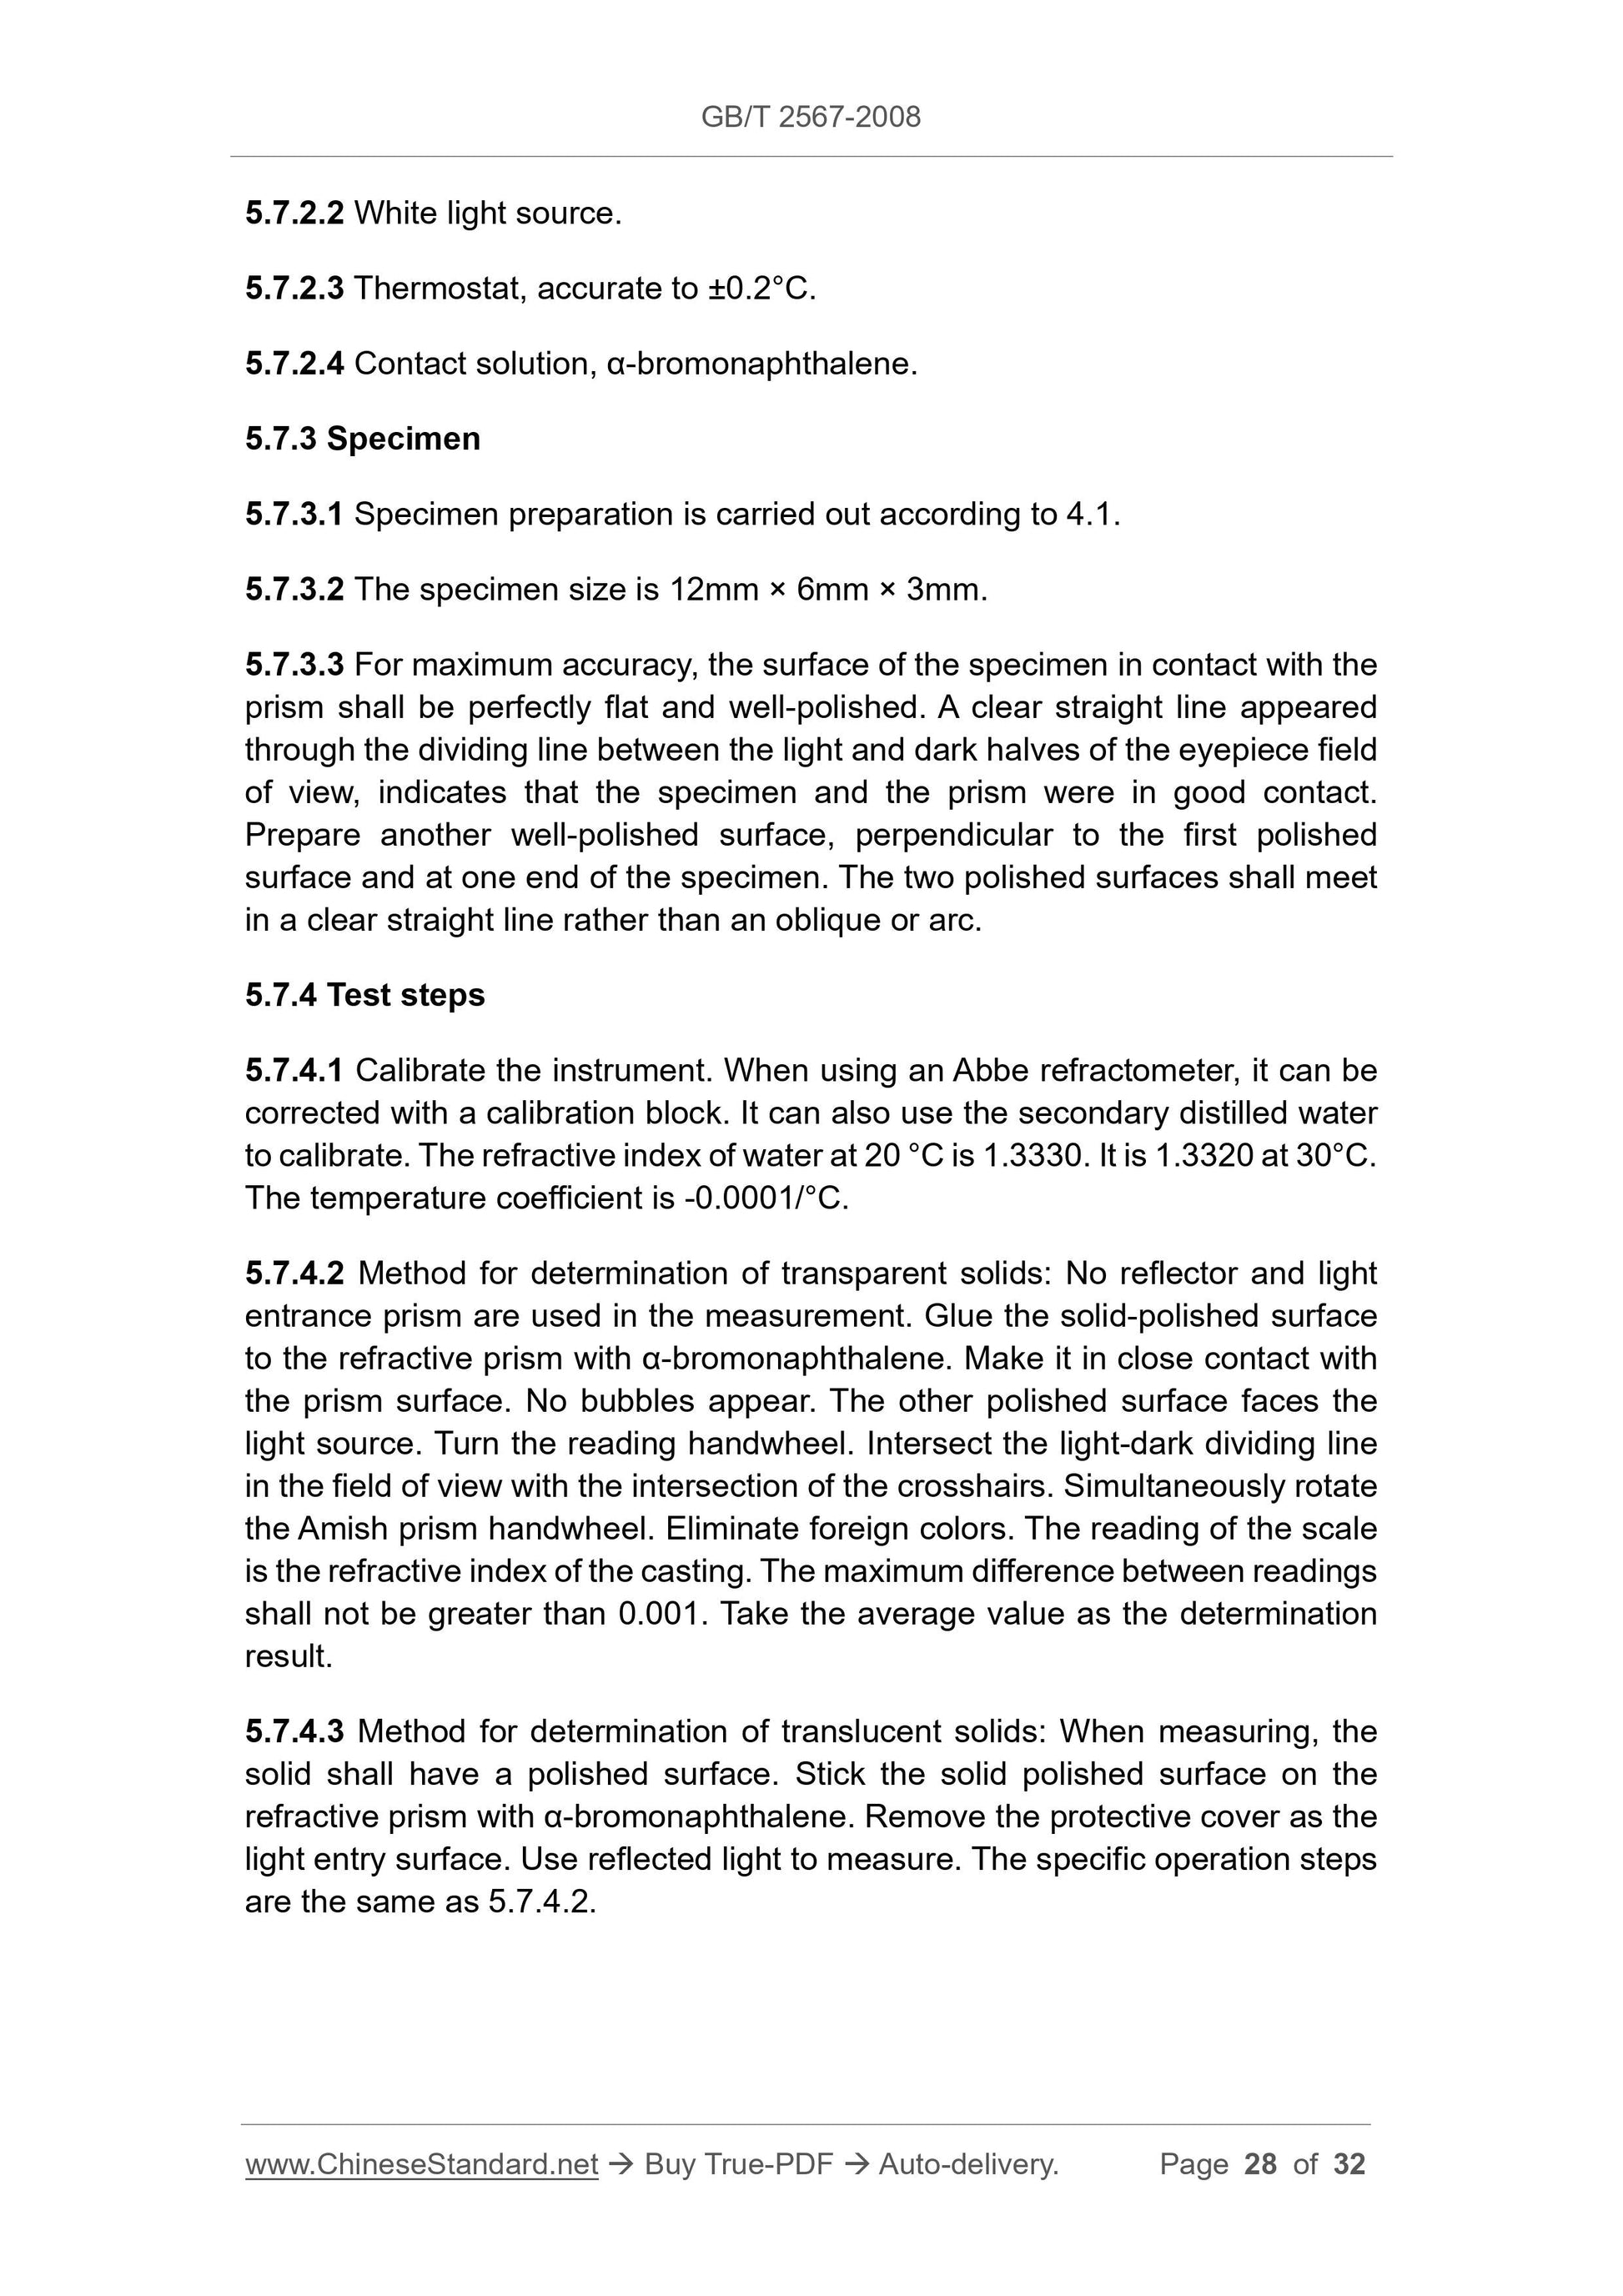 GB/T 2567-2008 Page 11